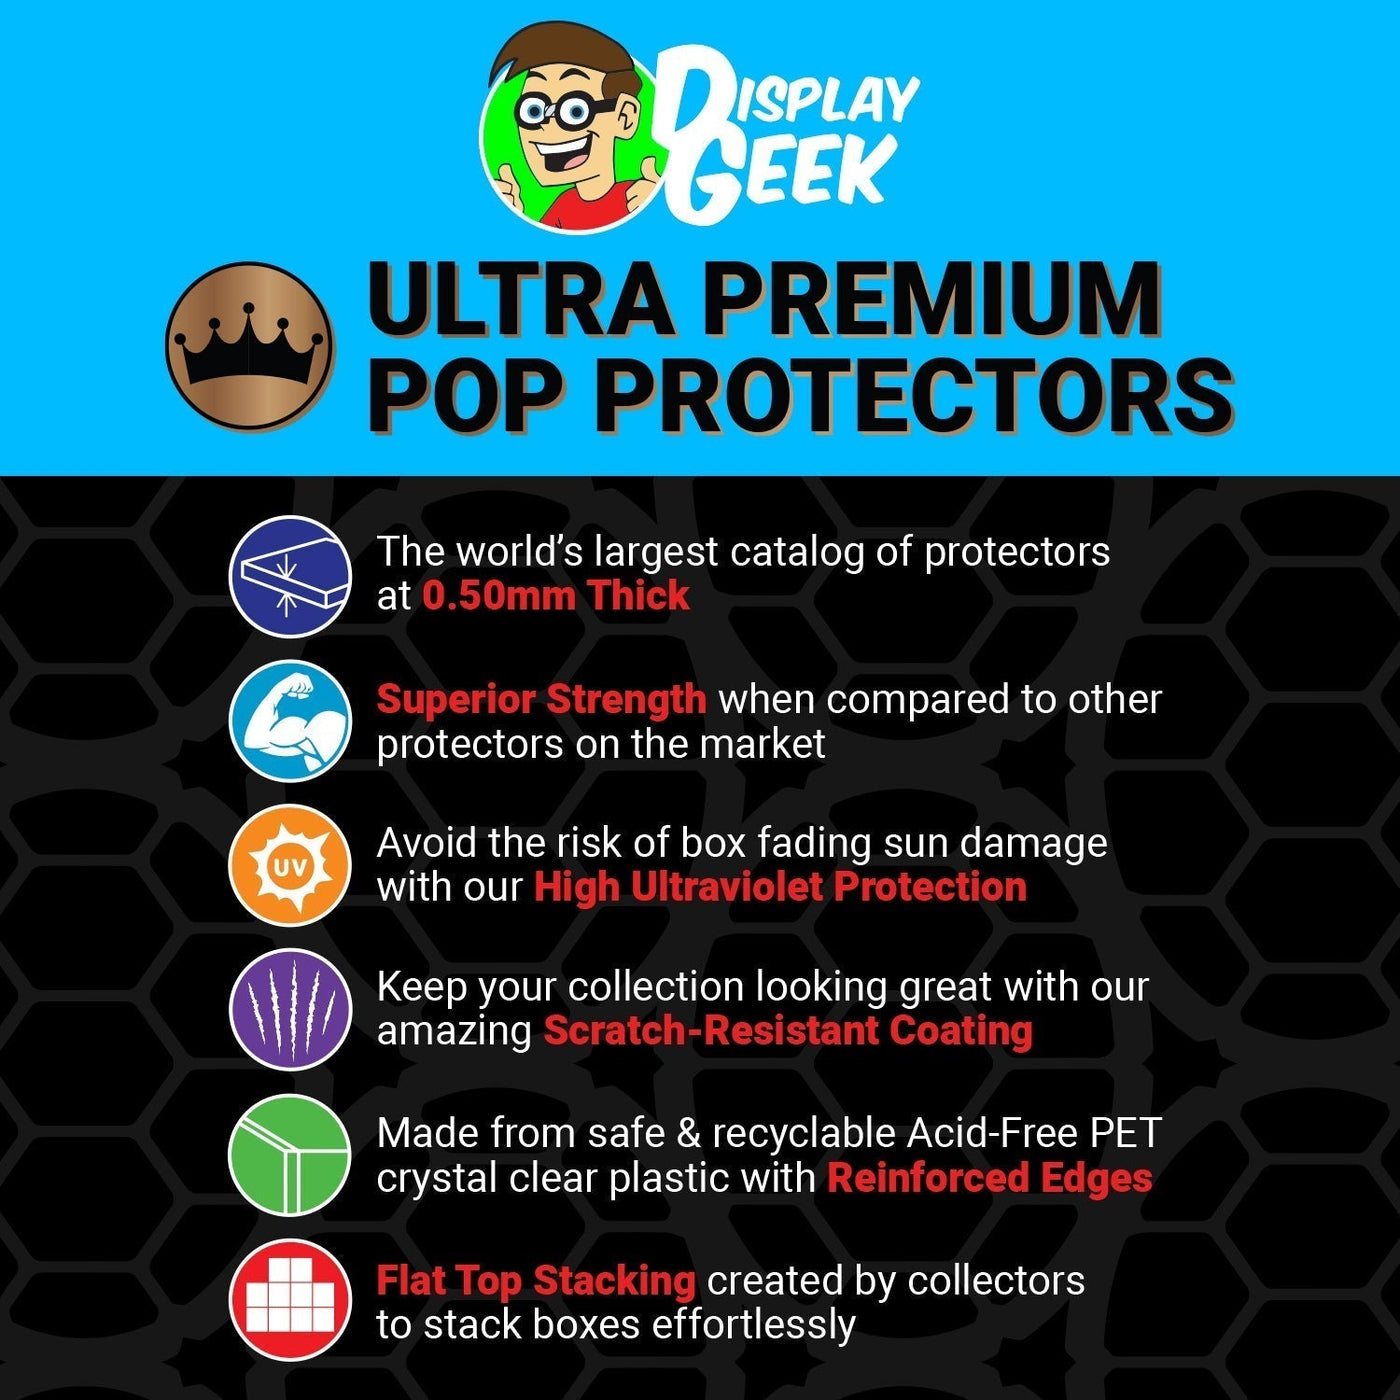 Pop Protector for 6 inch Aang Avatar State #1000 Super Funko Pop on The Protector Guide App by Display Geek